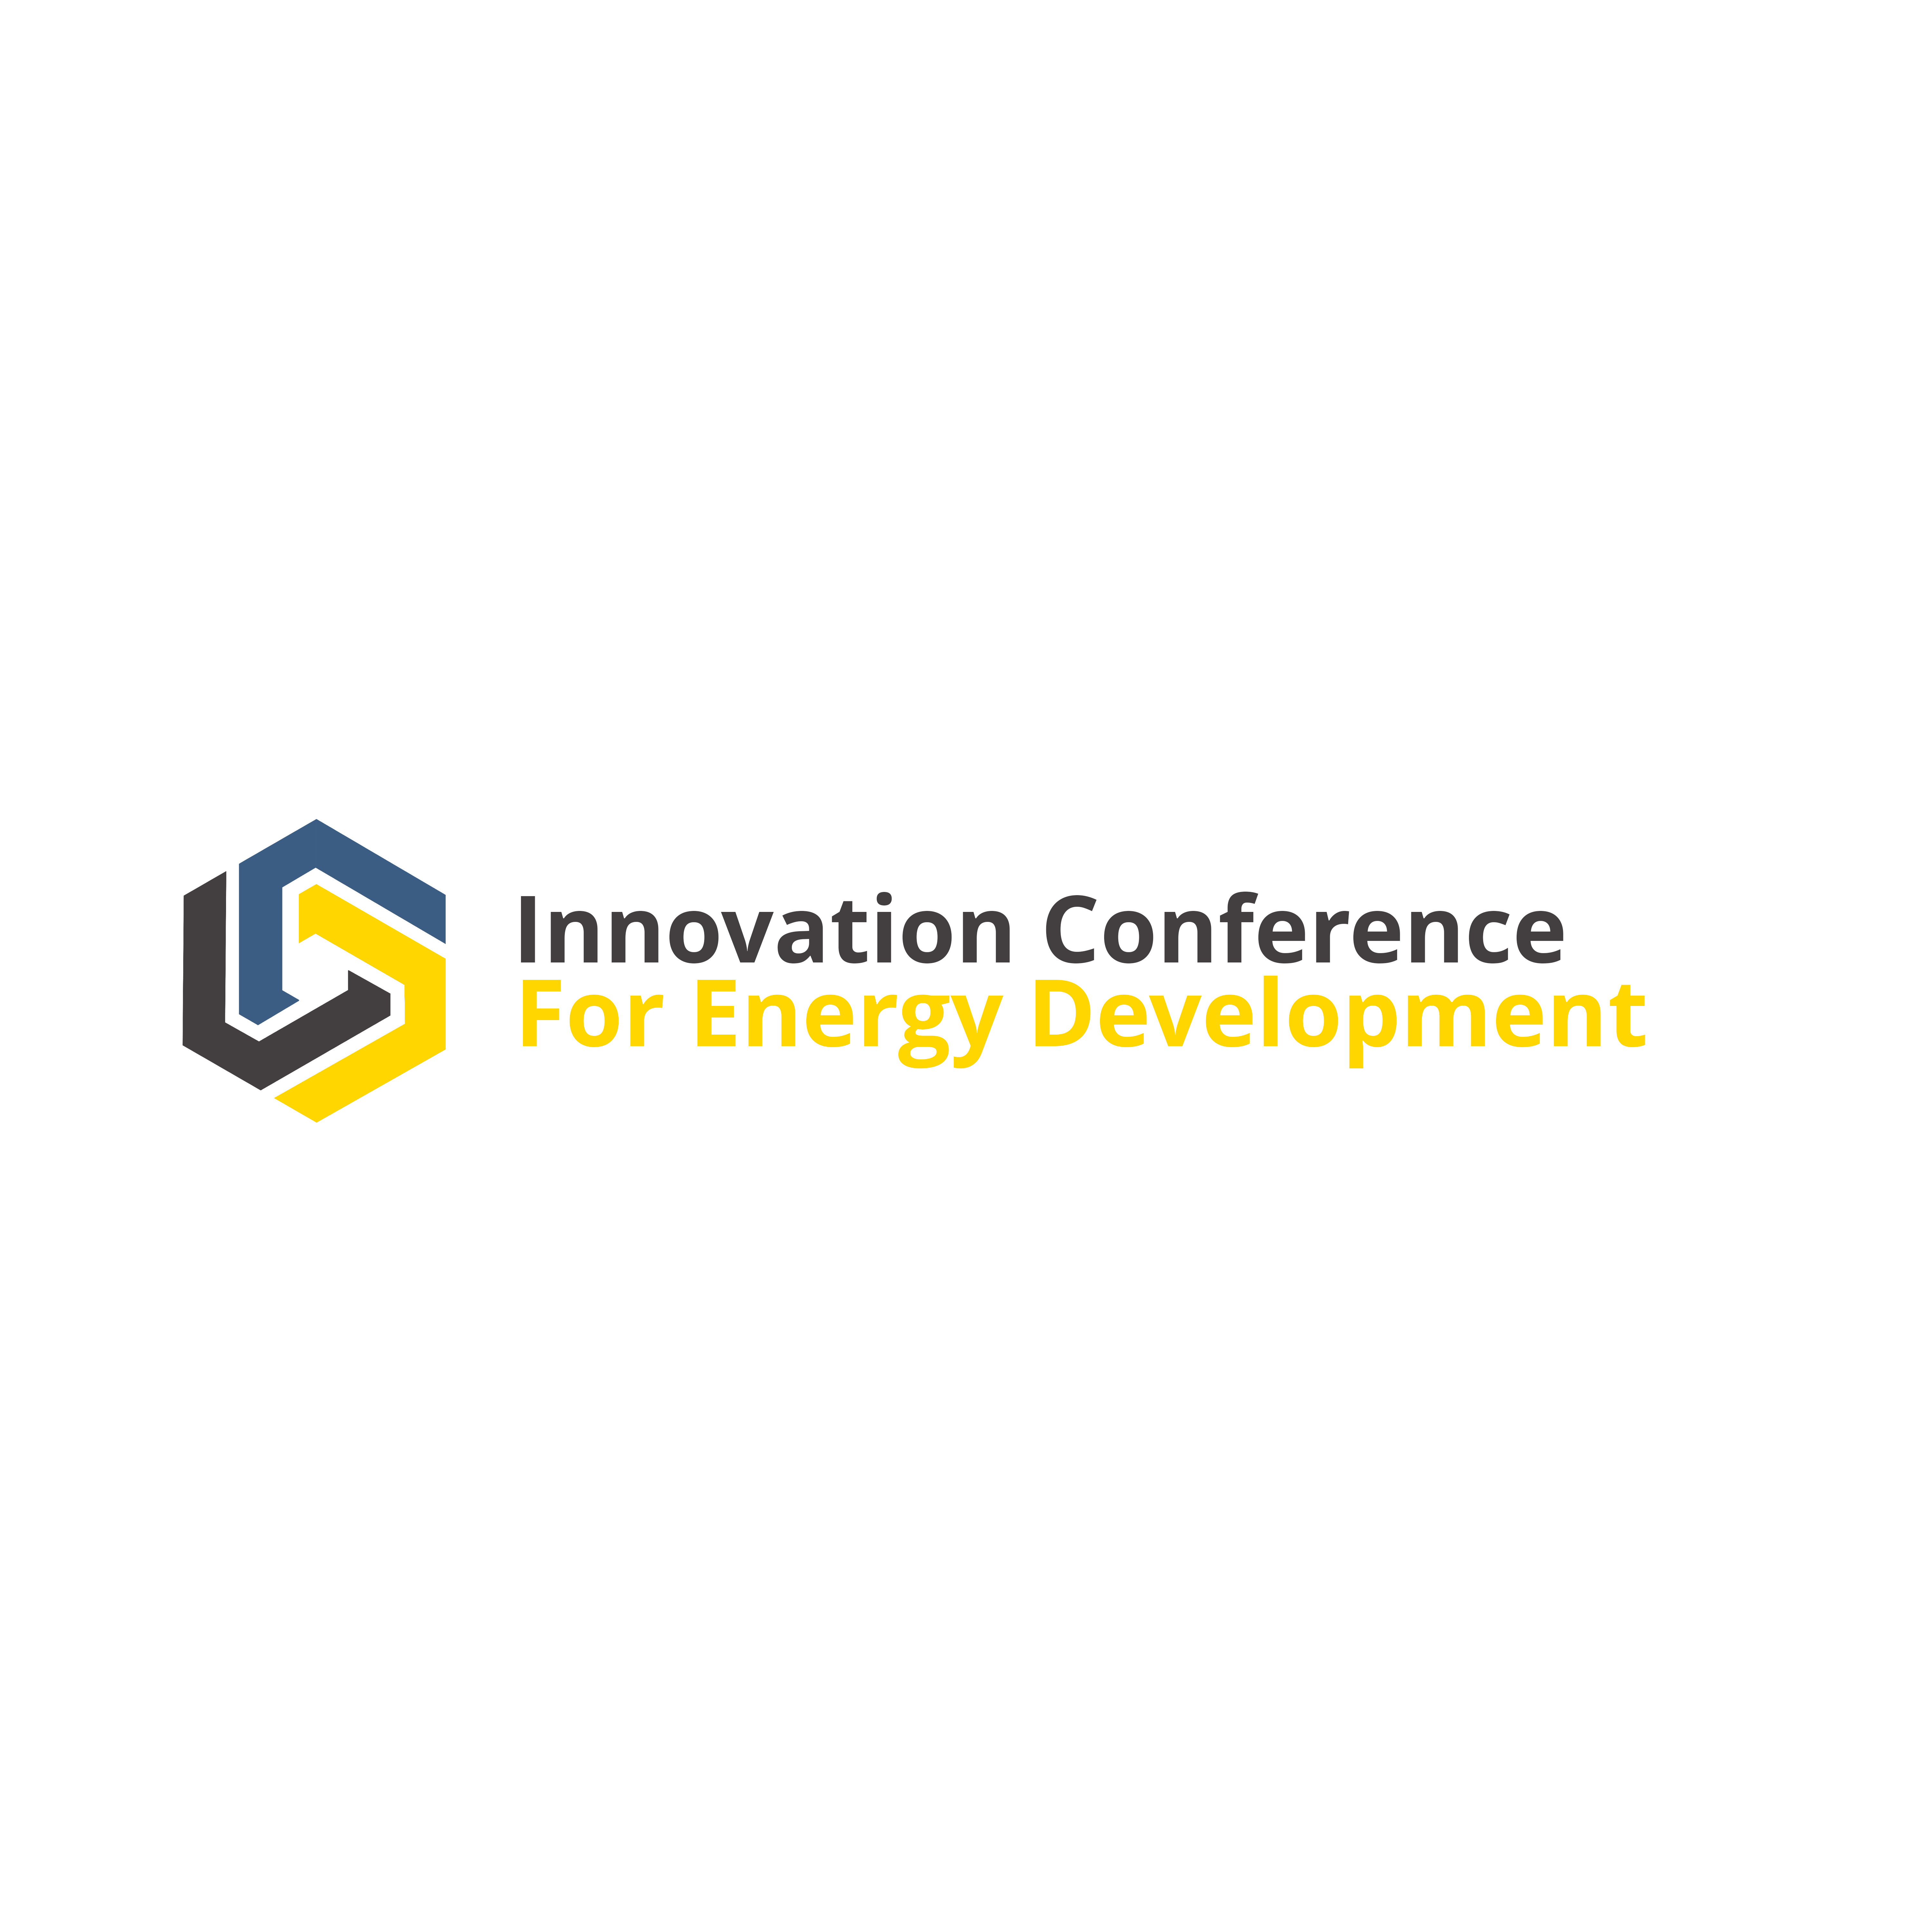 Innovation Conference for Energy Development